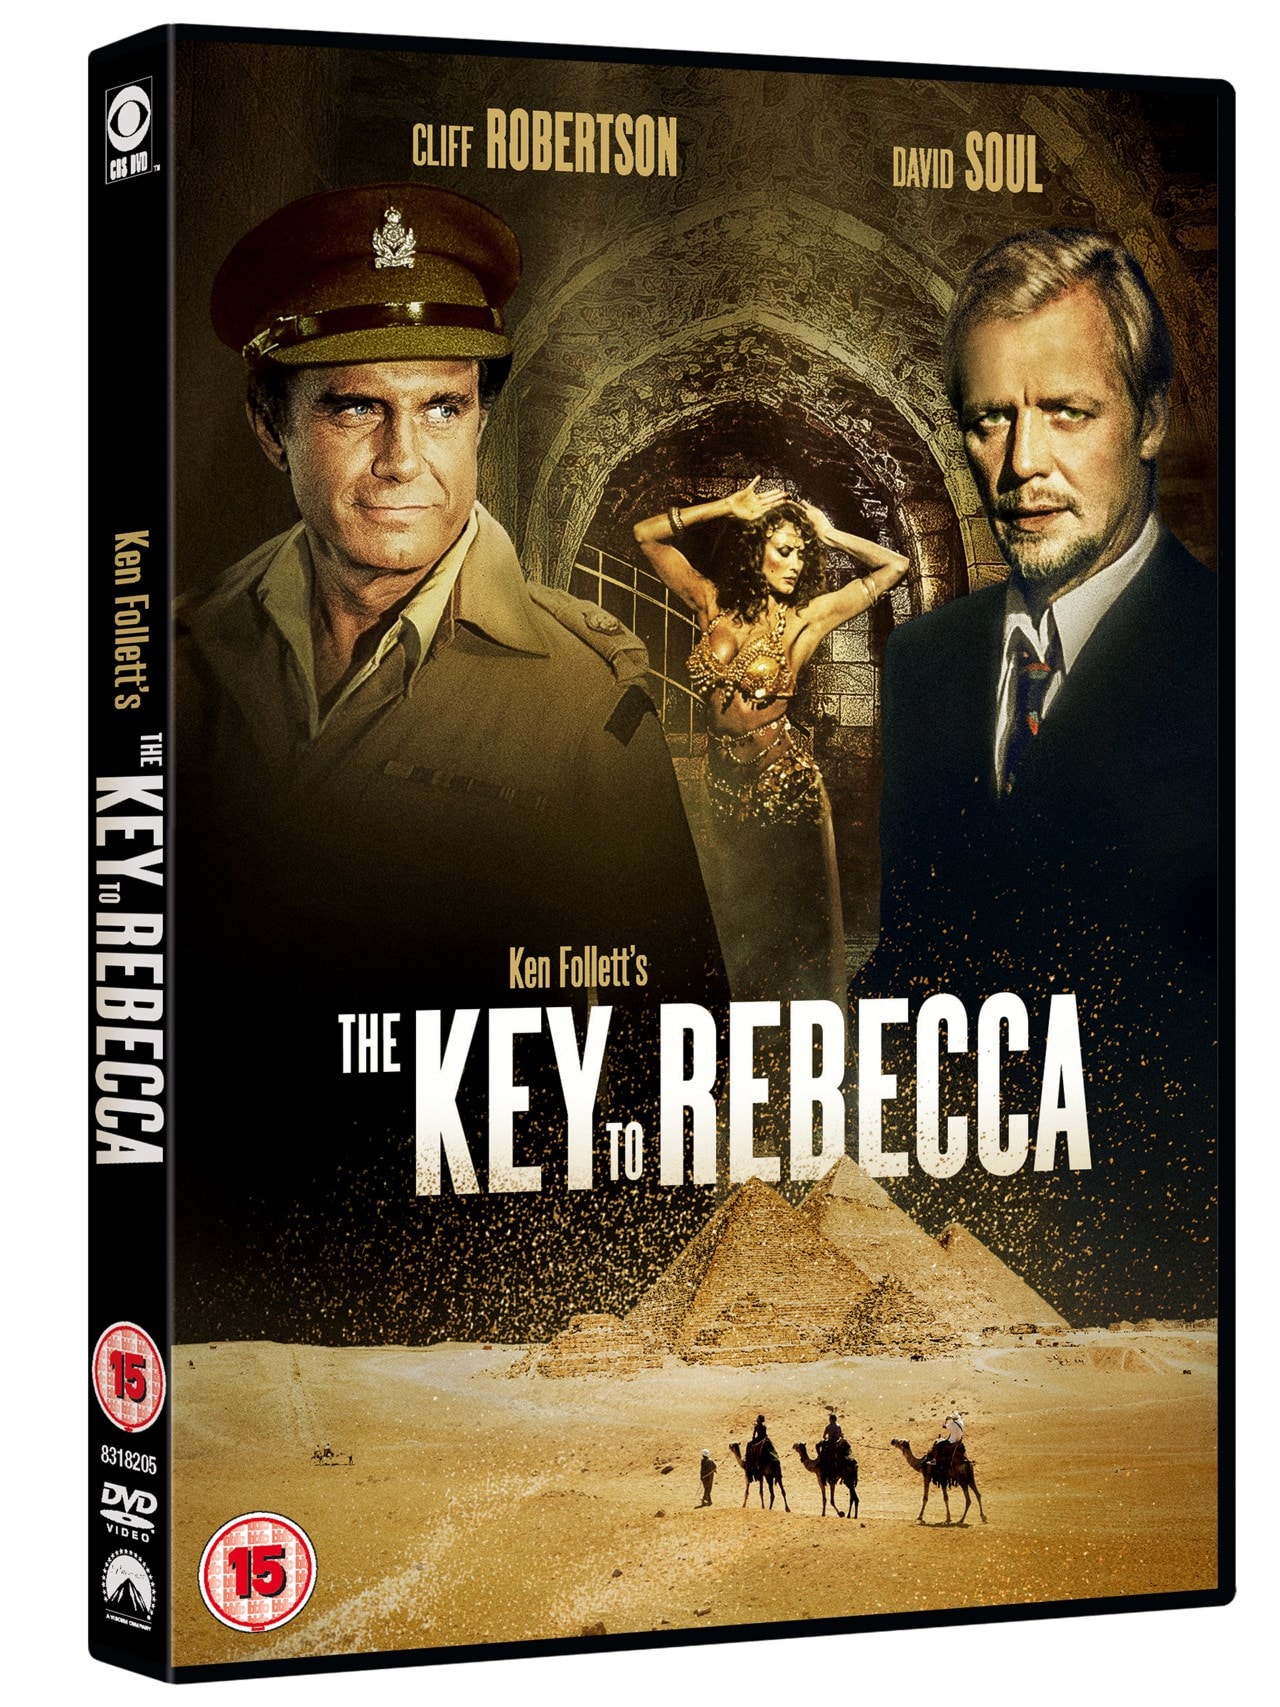 The key to rebecca 1985 torrent download